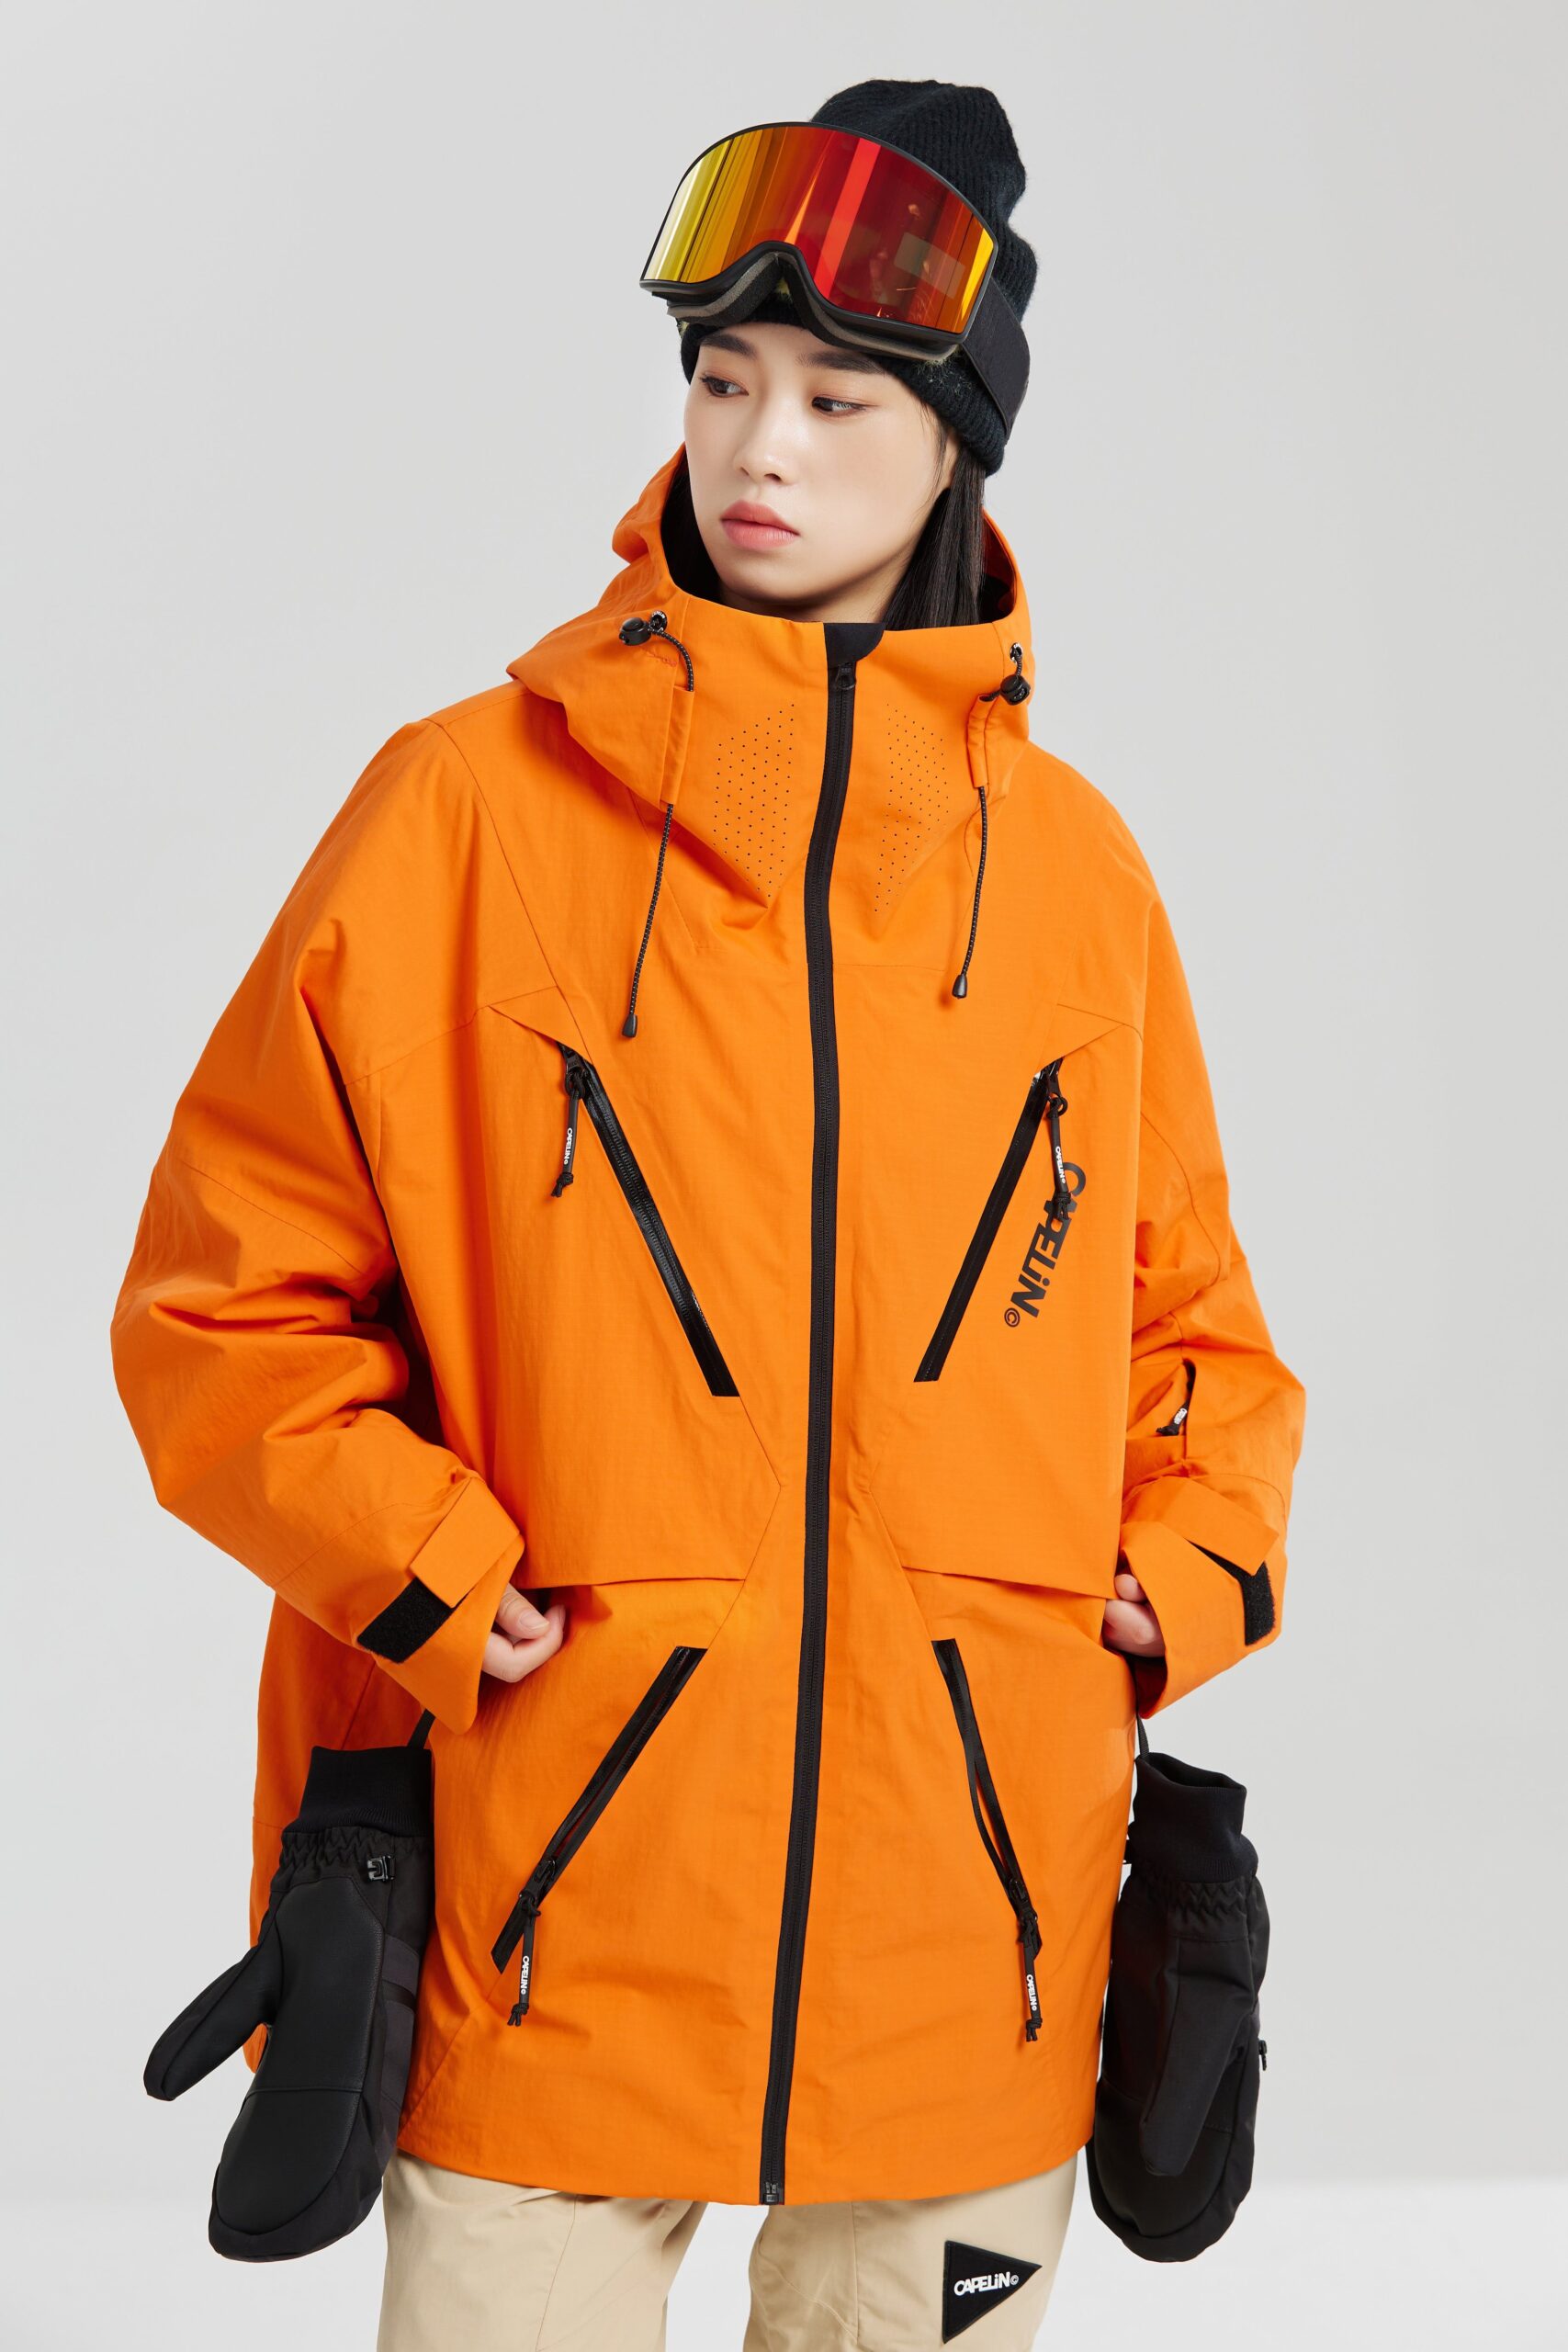 The best snowboarding jackets that keeps
you comfortable